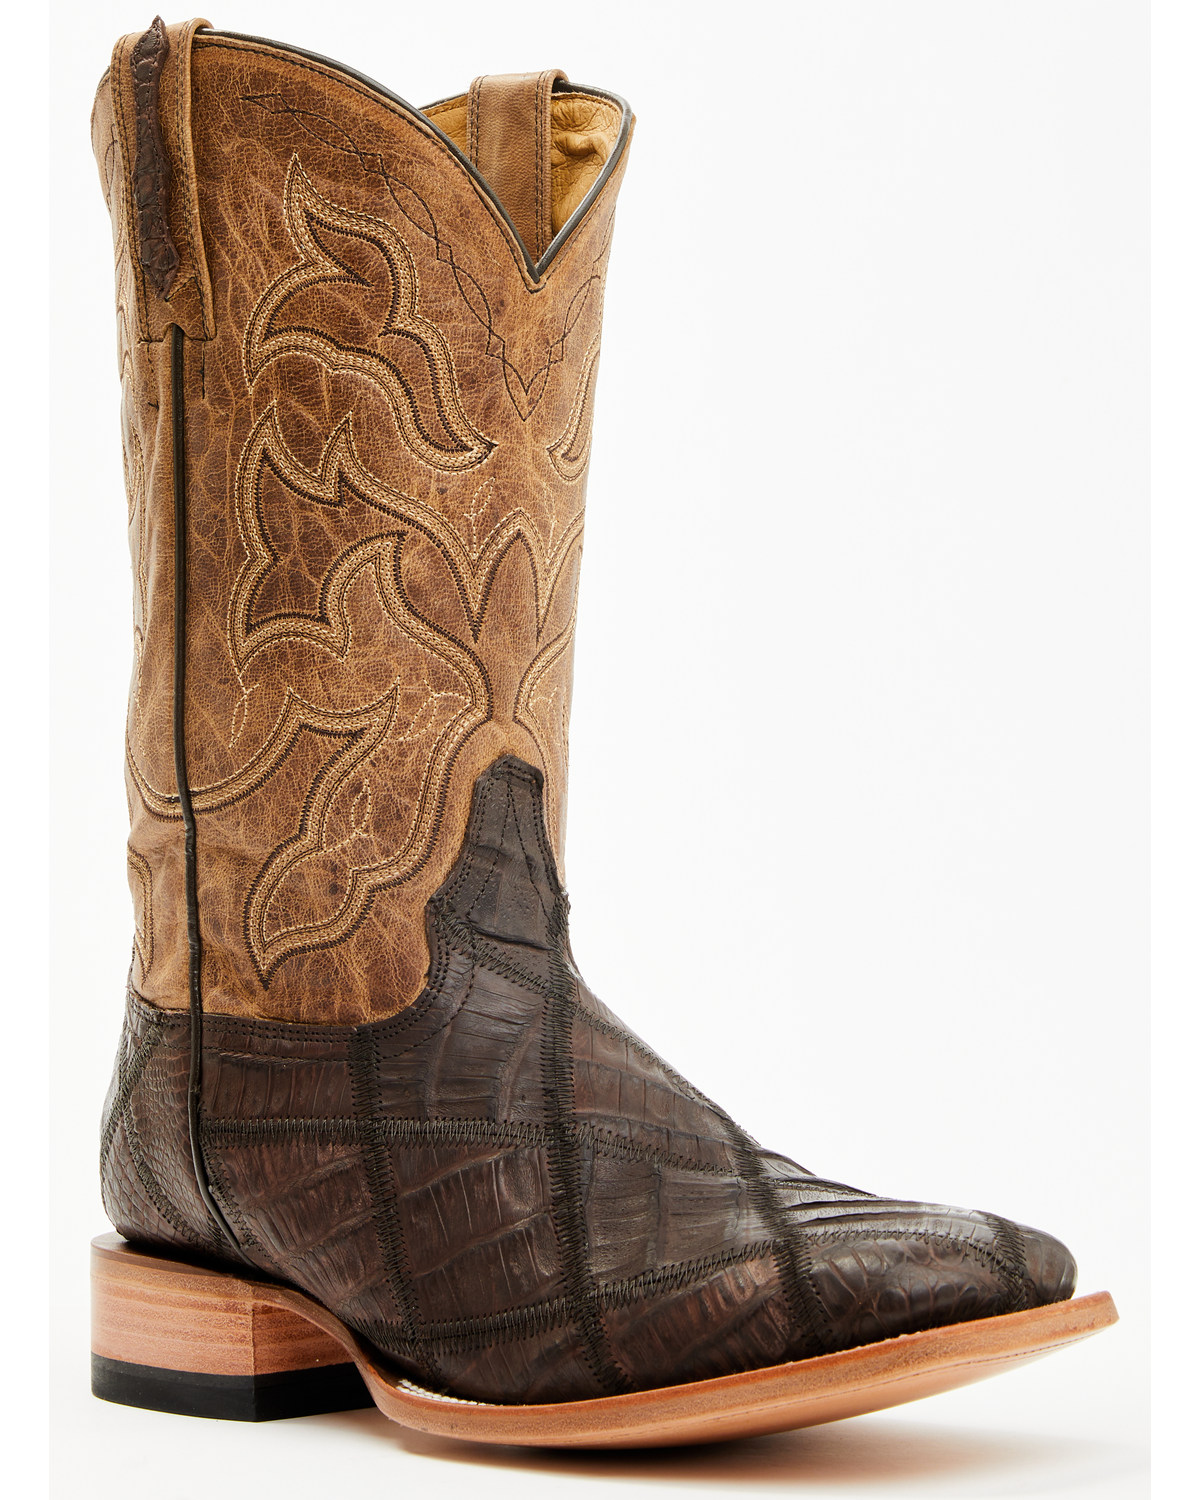 Cody James Men's Exotic Caiman Western Boots - Broad Square Toe